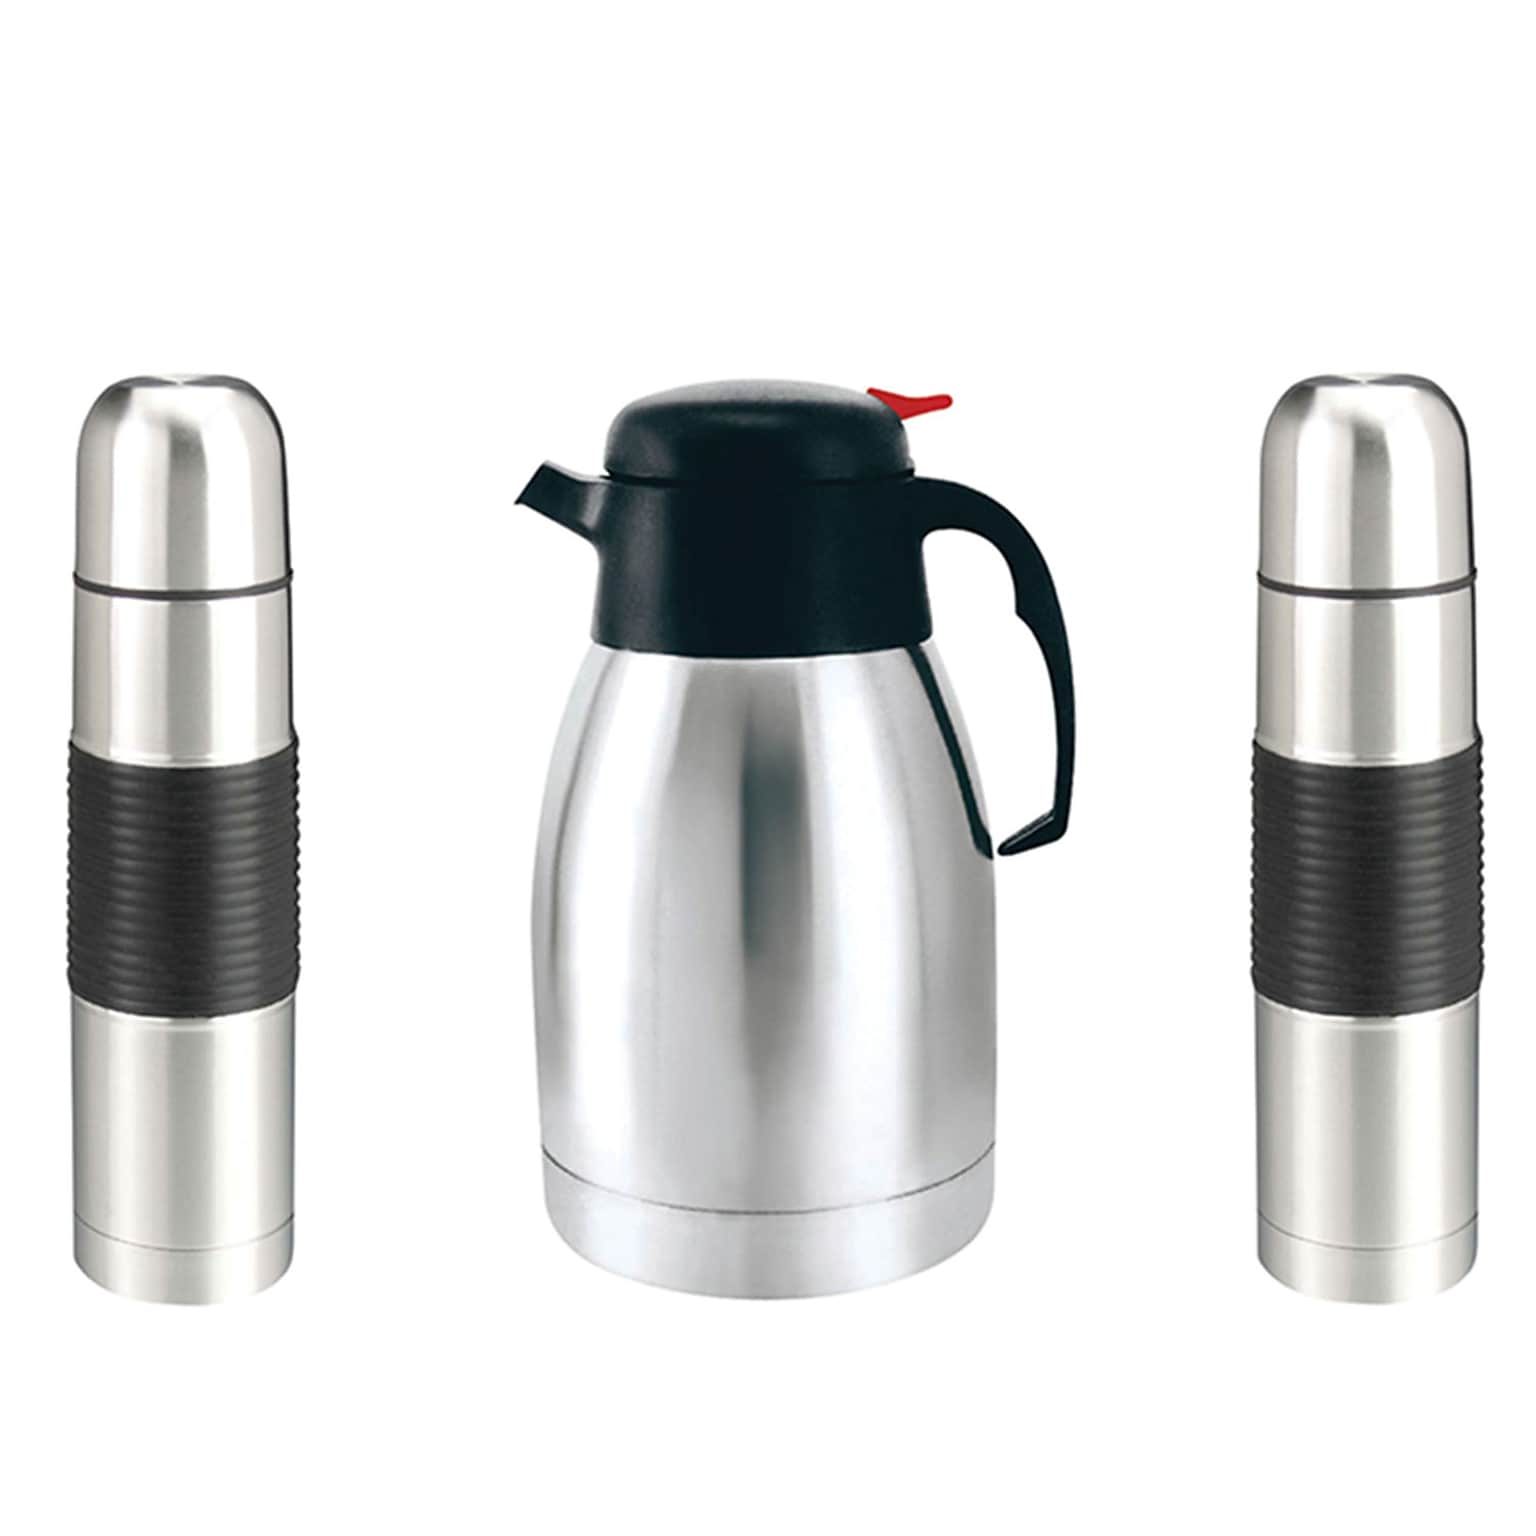 Brentwood Appliances 40oz. Stainless Steel Coffee Carafe/16oz Stainless Steel Coffee Thermoses, Black, 2/Bundle (843631126165)